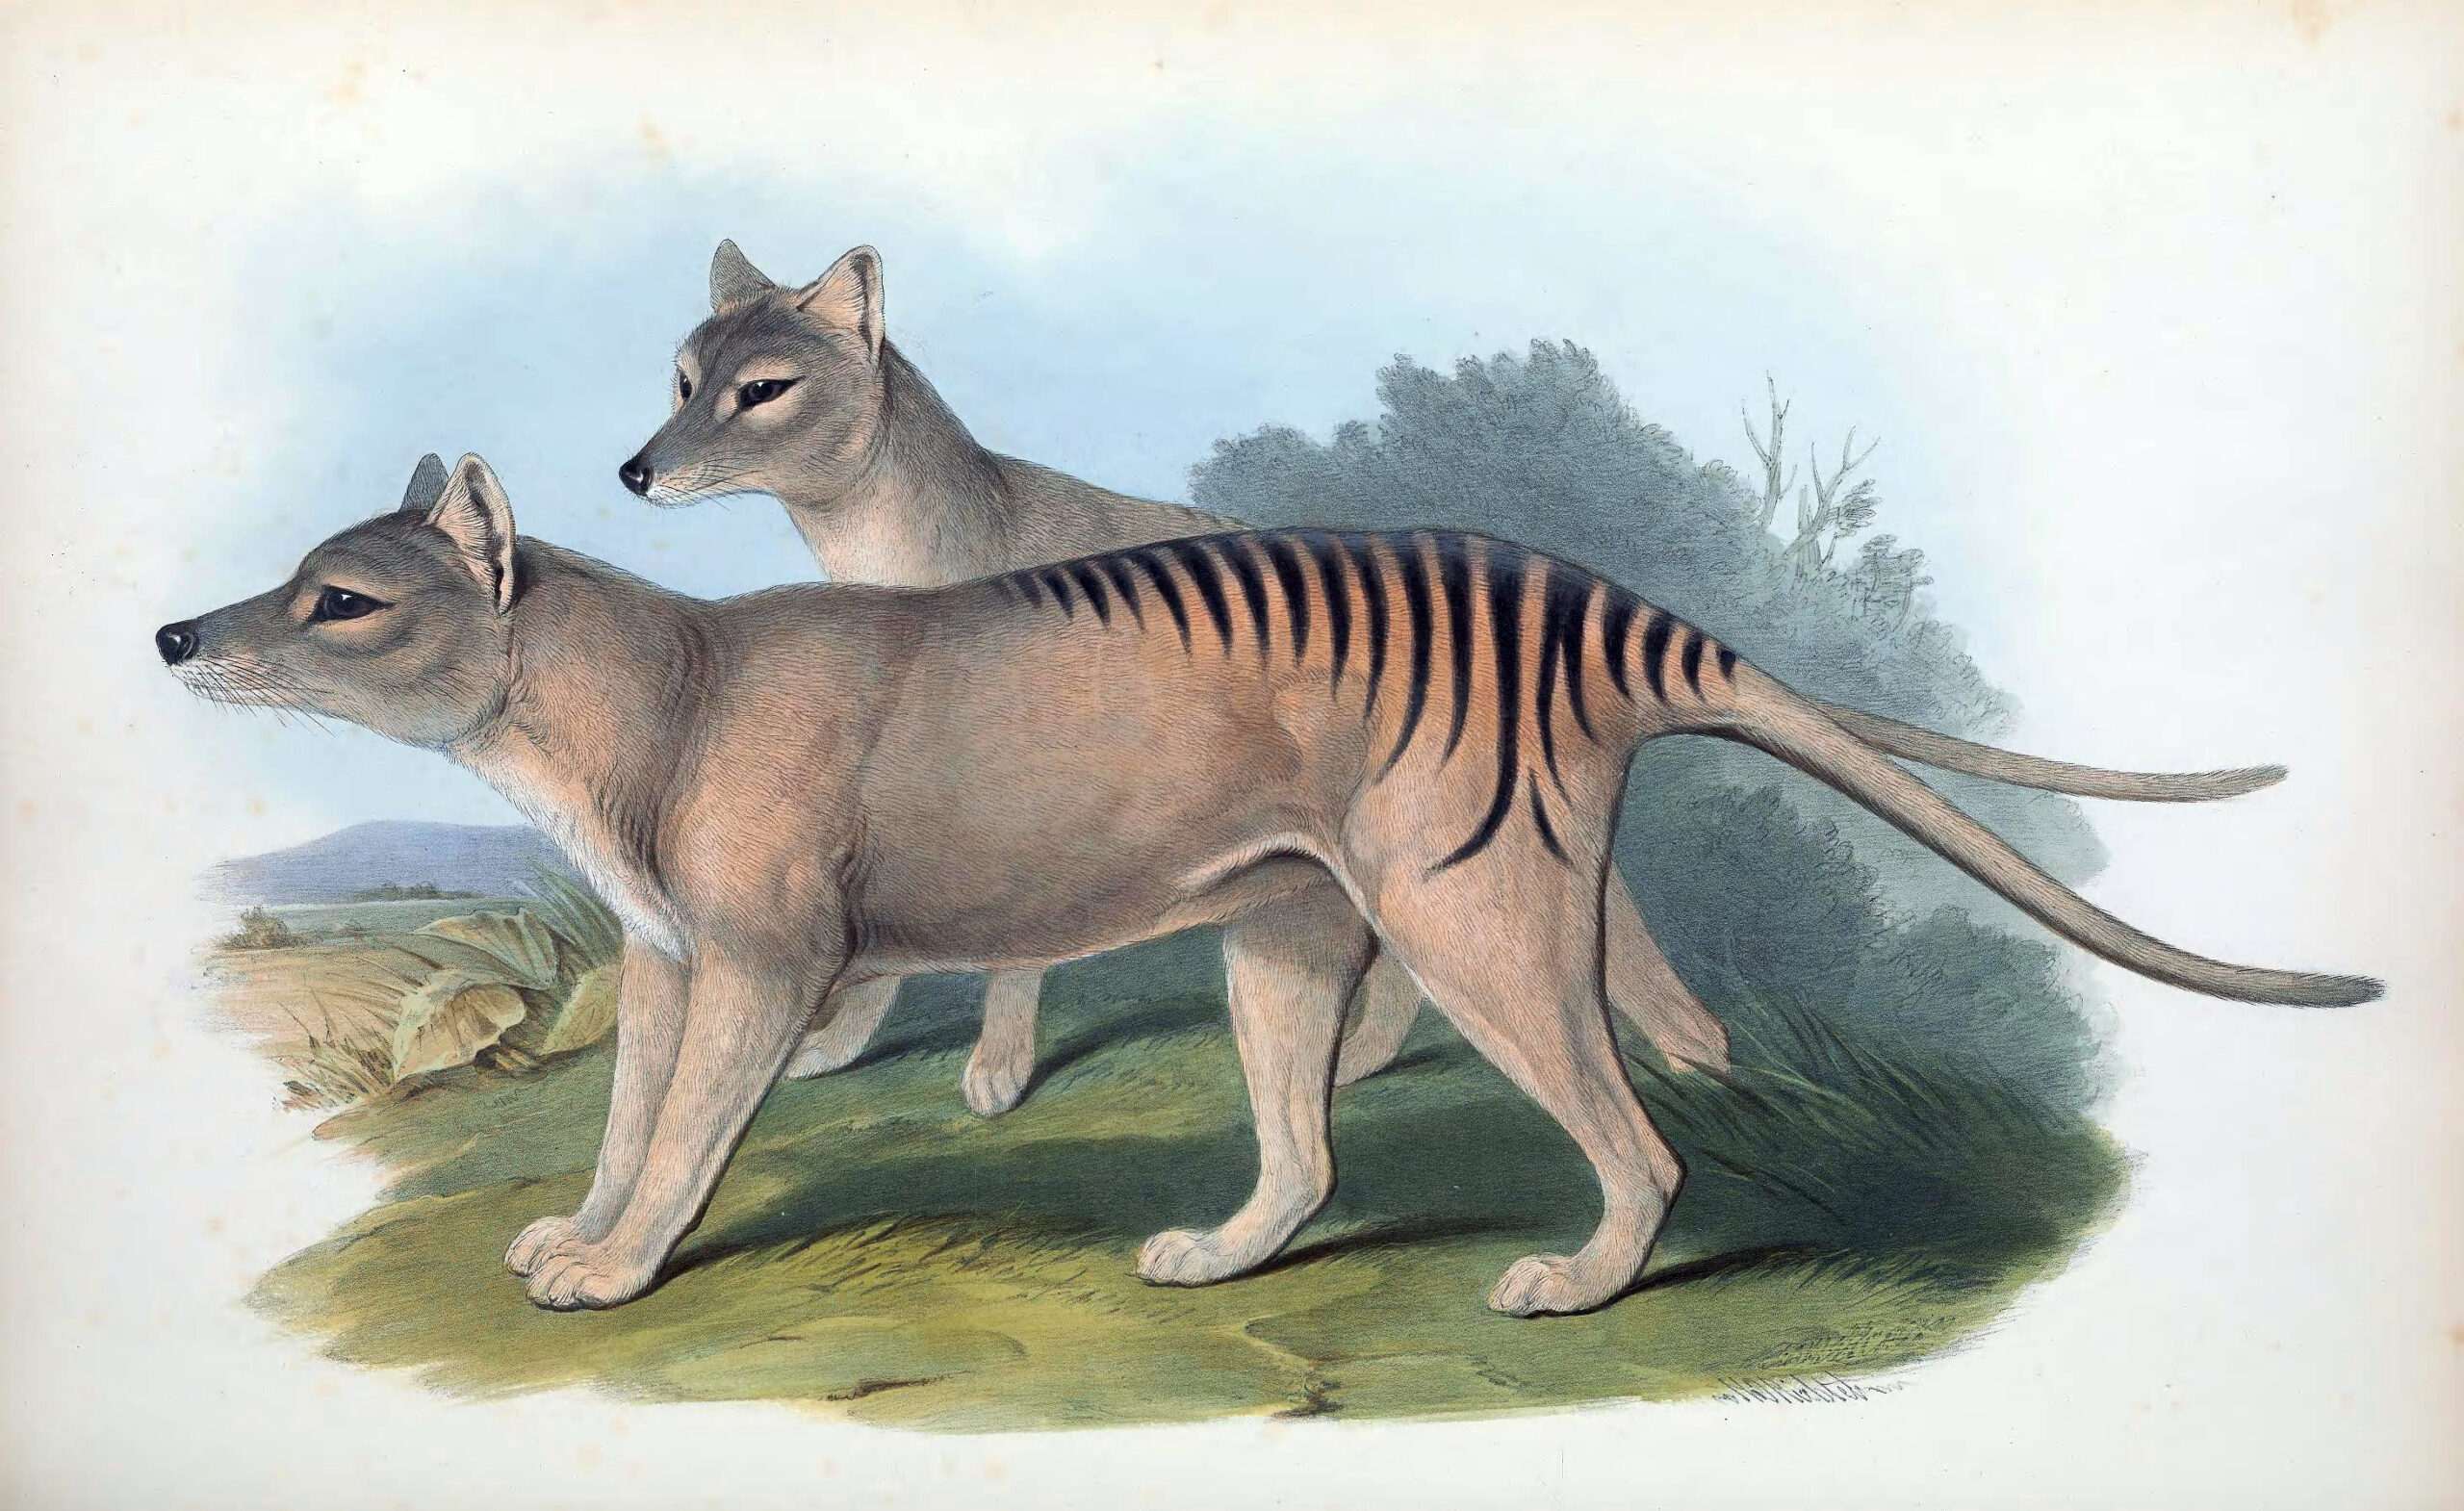 Scientists Are Resurrecting the Tasmanian Tiger from Extinction